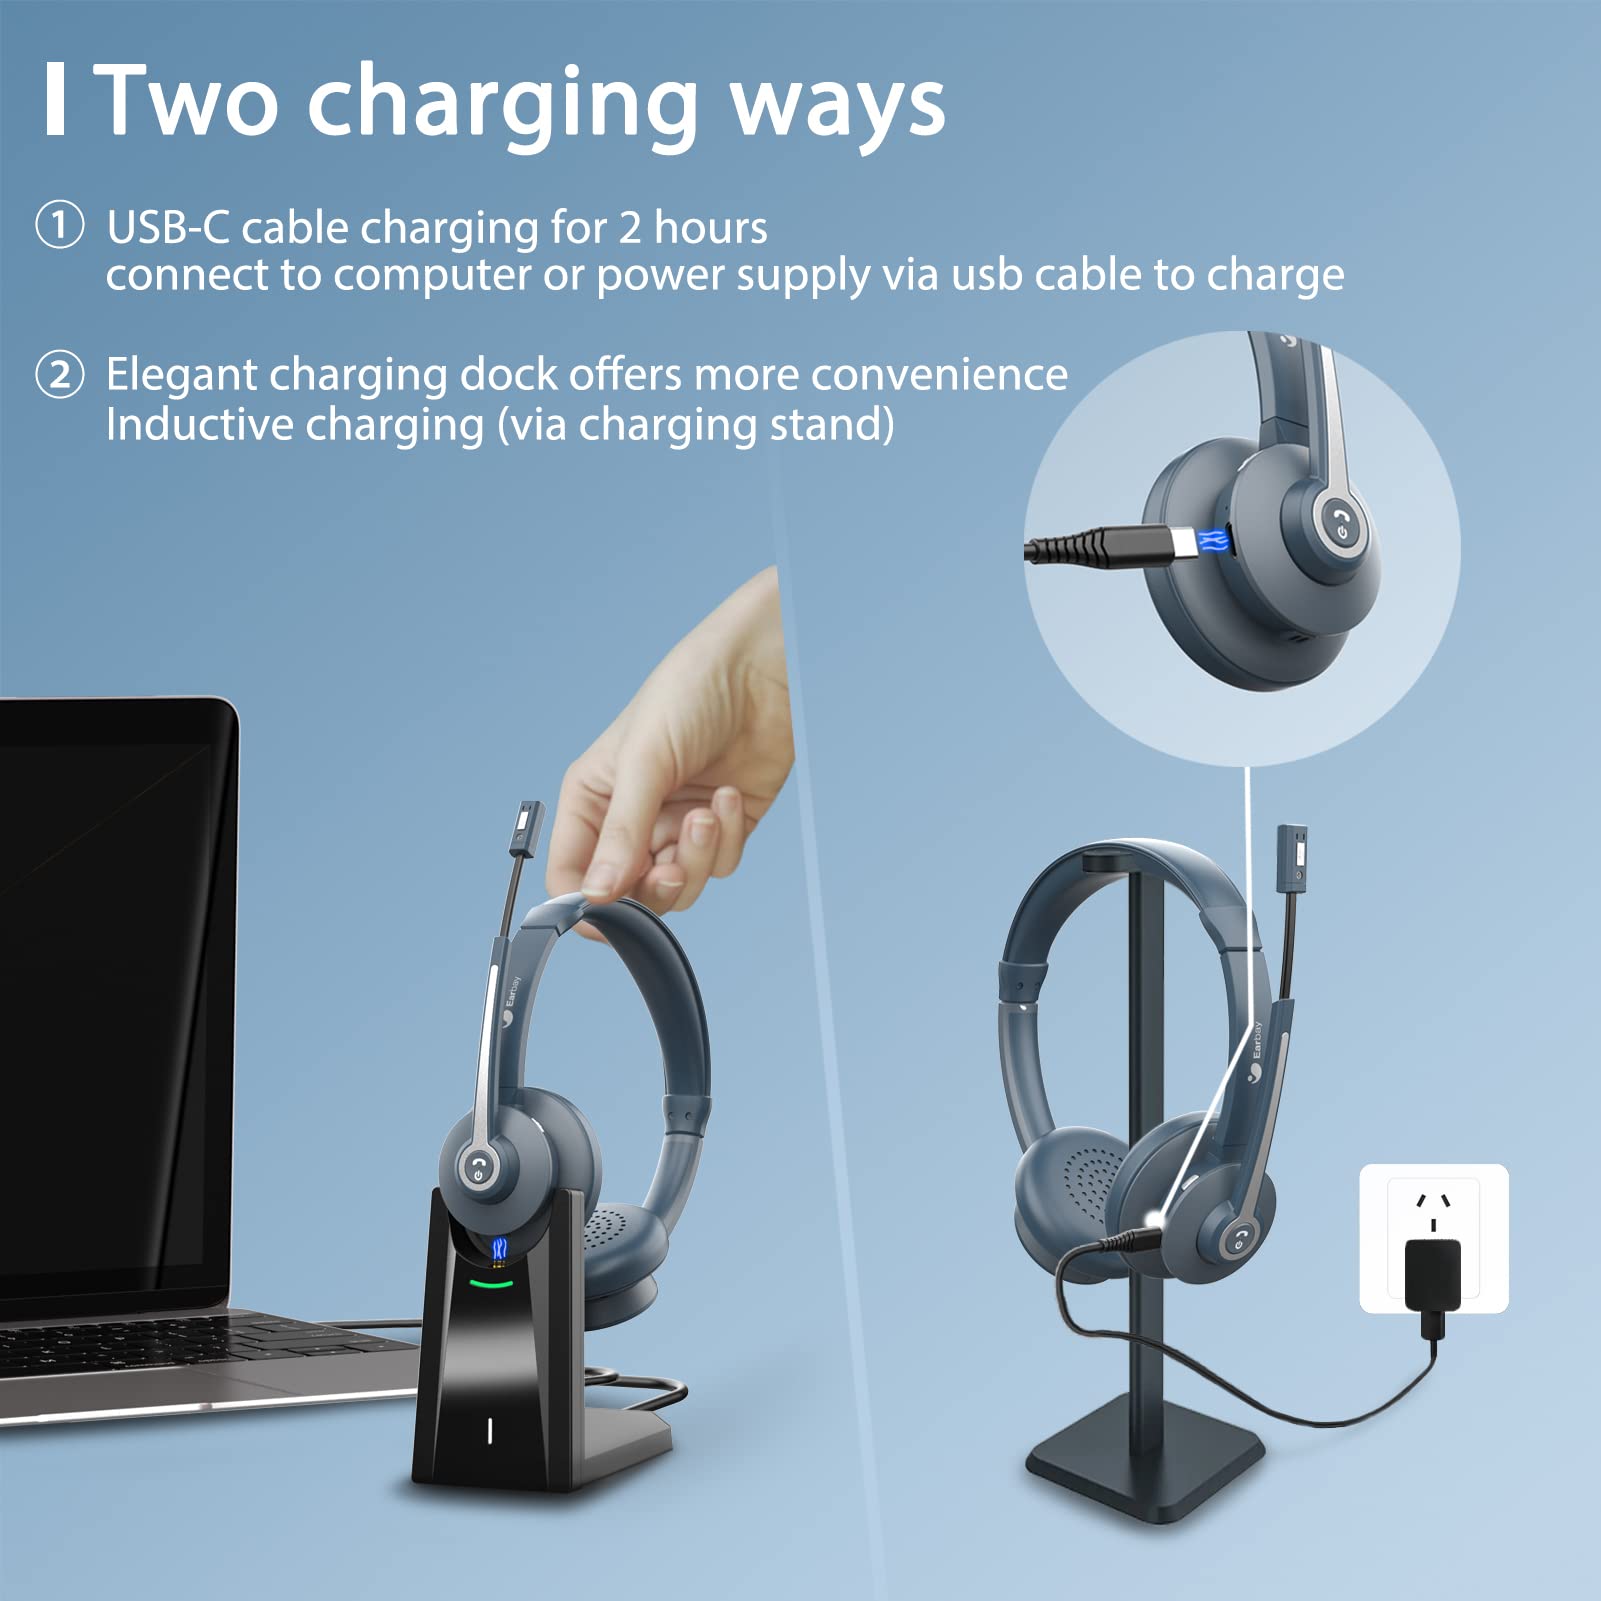 Two charging ways,USB-C cable charging gor hours connect to computer or power supply via usb cable to charge,Elegant charging dock offers more convenience inductive charging(via charging stand)